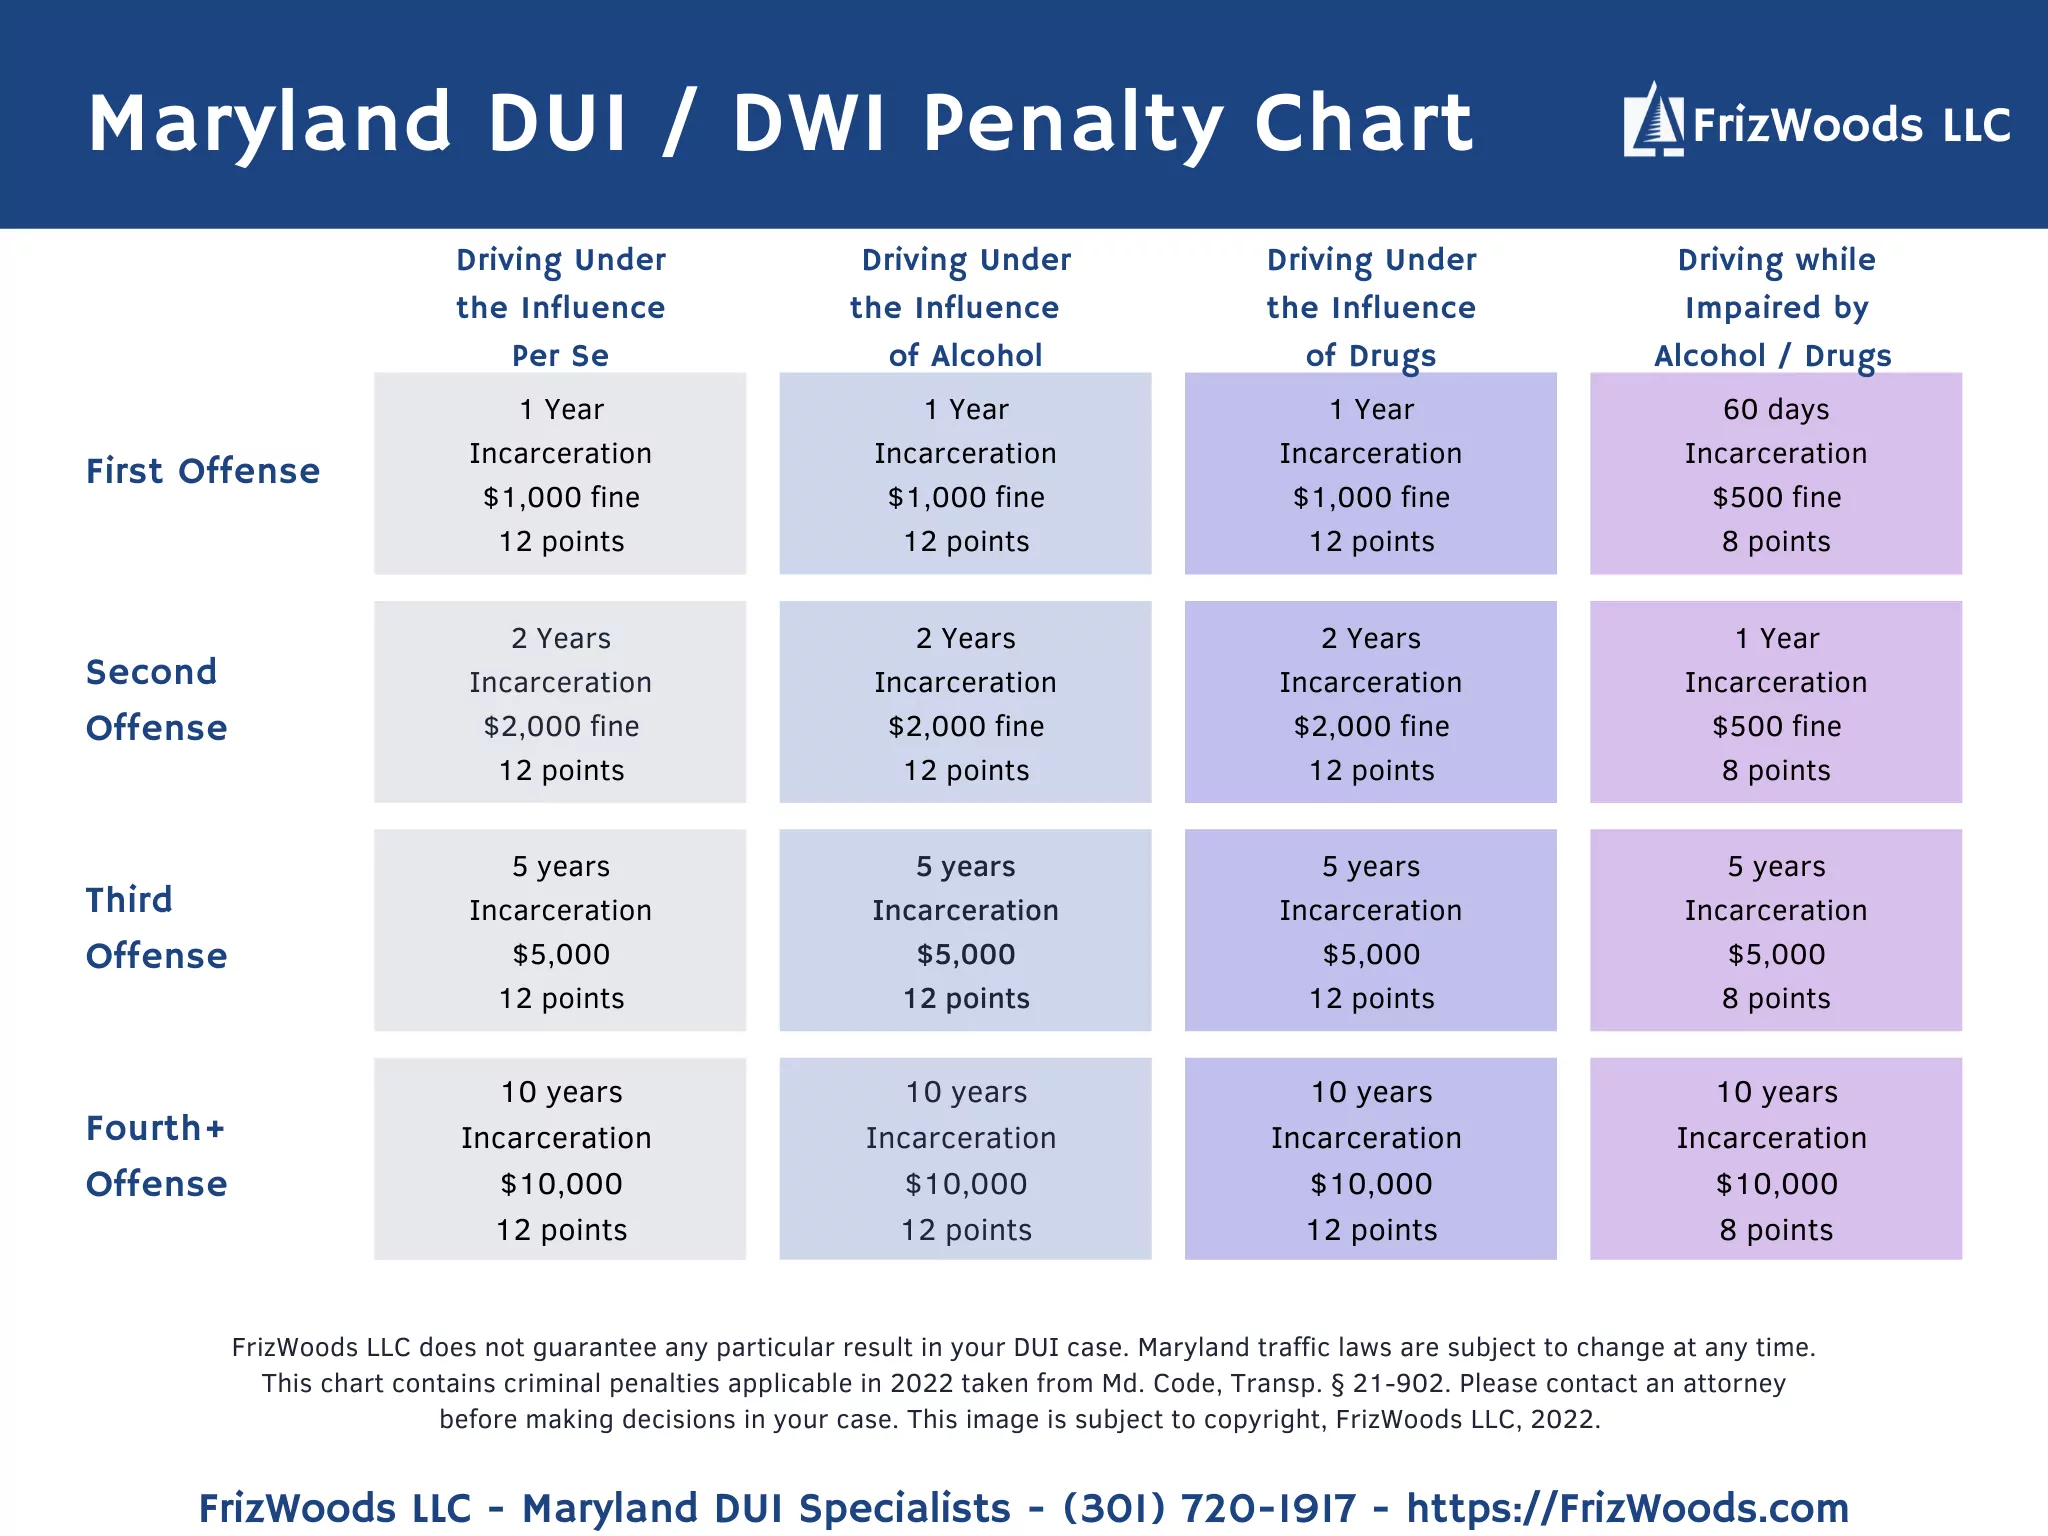 Maryland DUI Penalty chart